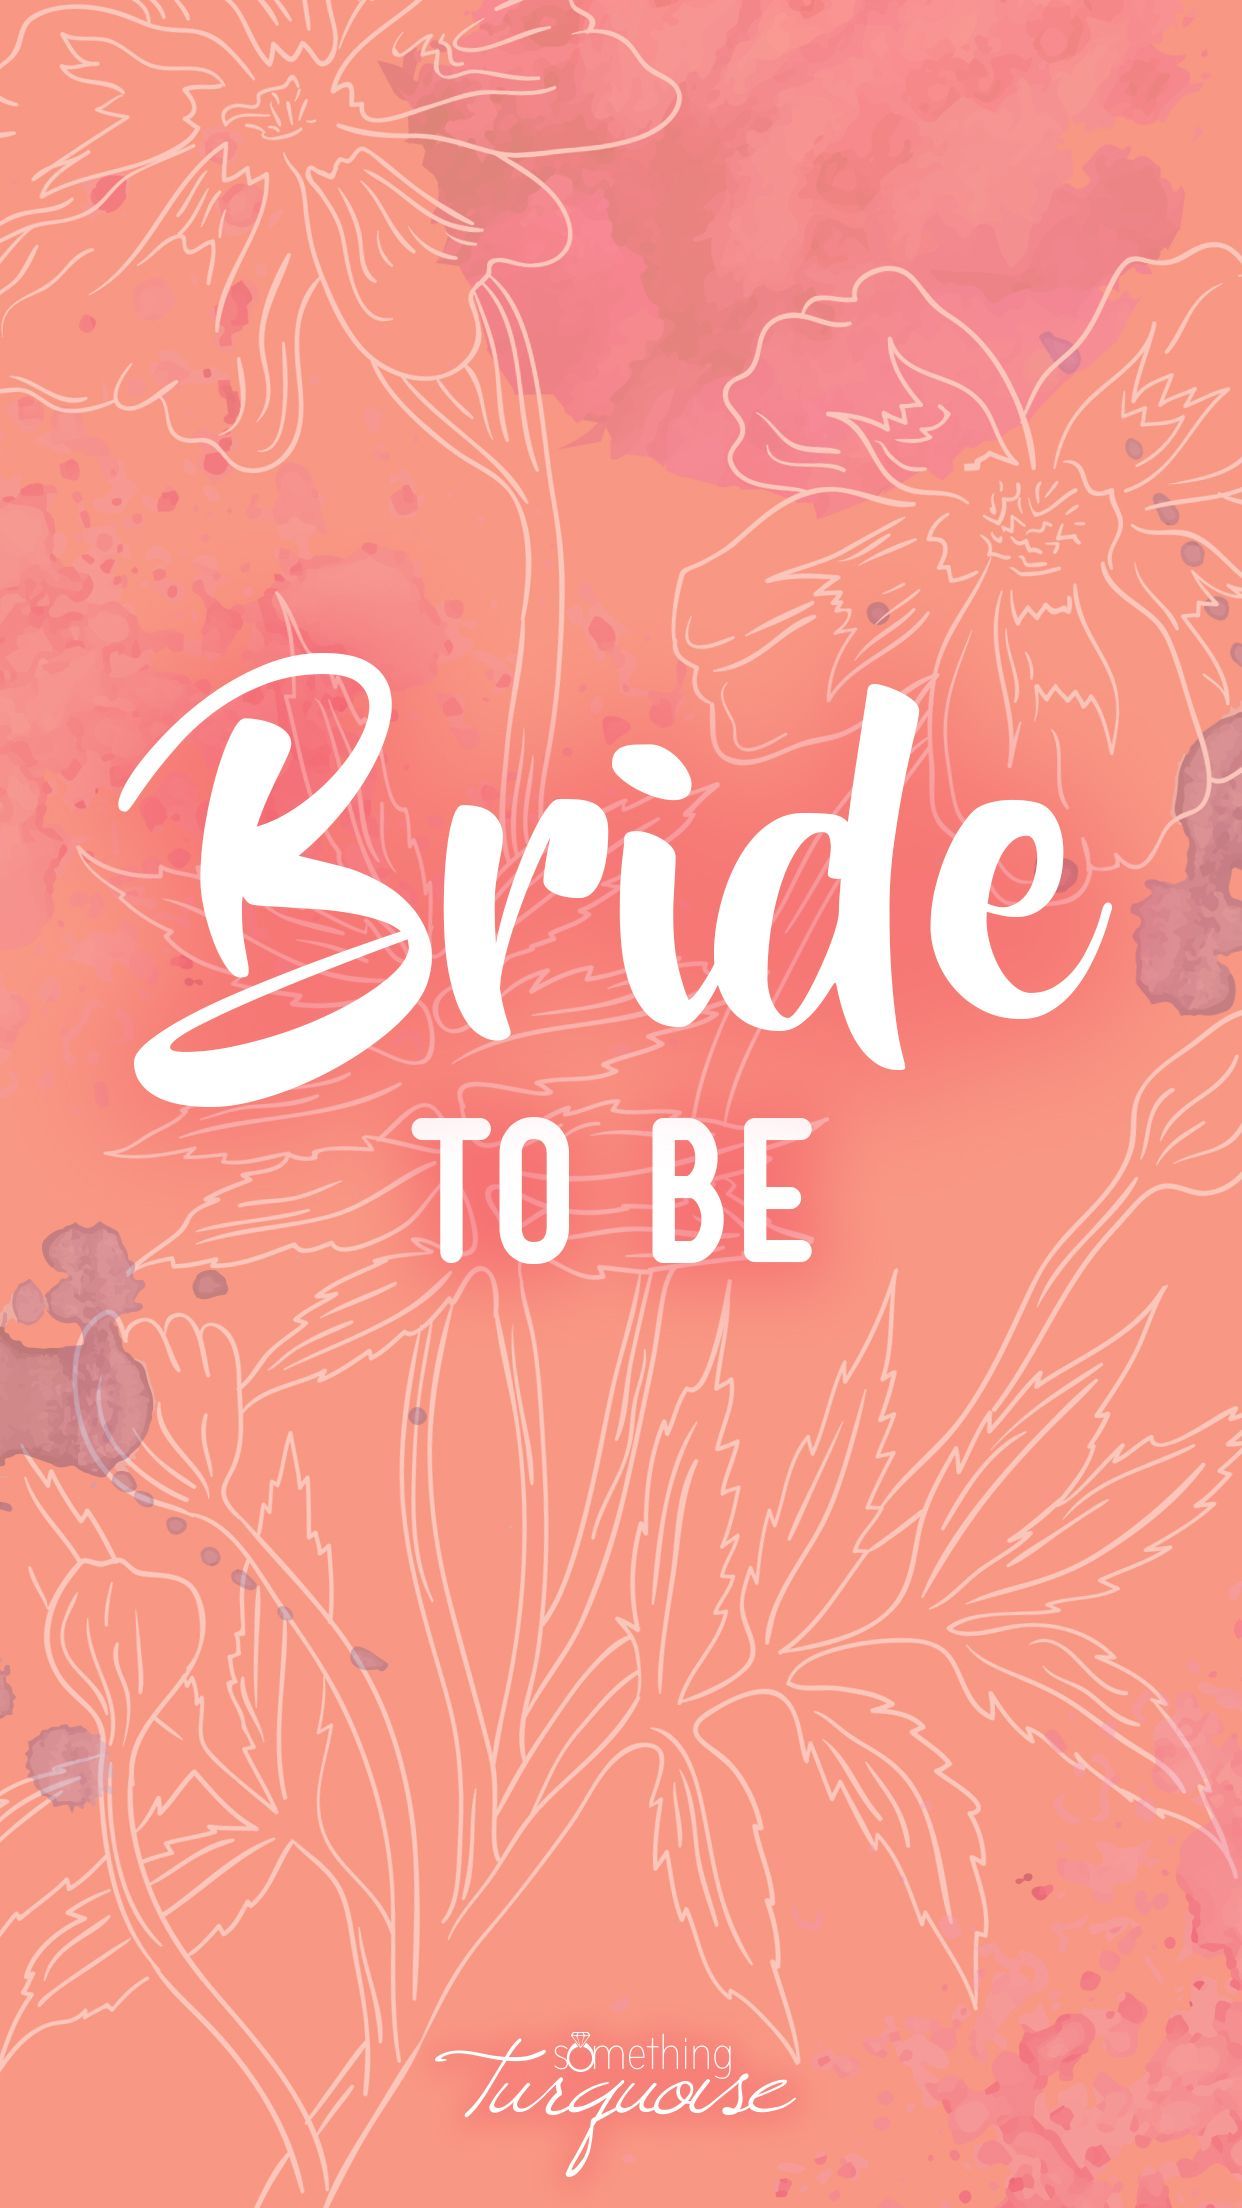 Free IPhone Wallpaper For The Newly Engaged Bride!. Bride To Be Quotes, IPhone Wallpaper, Smartphone Wallpaper